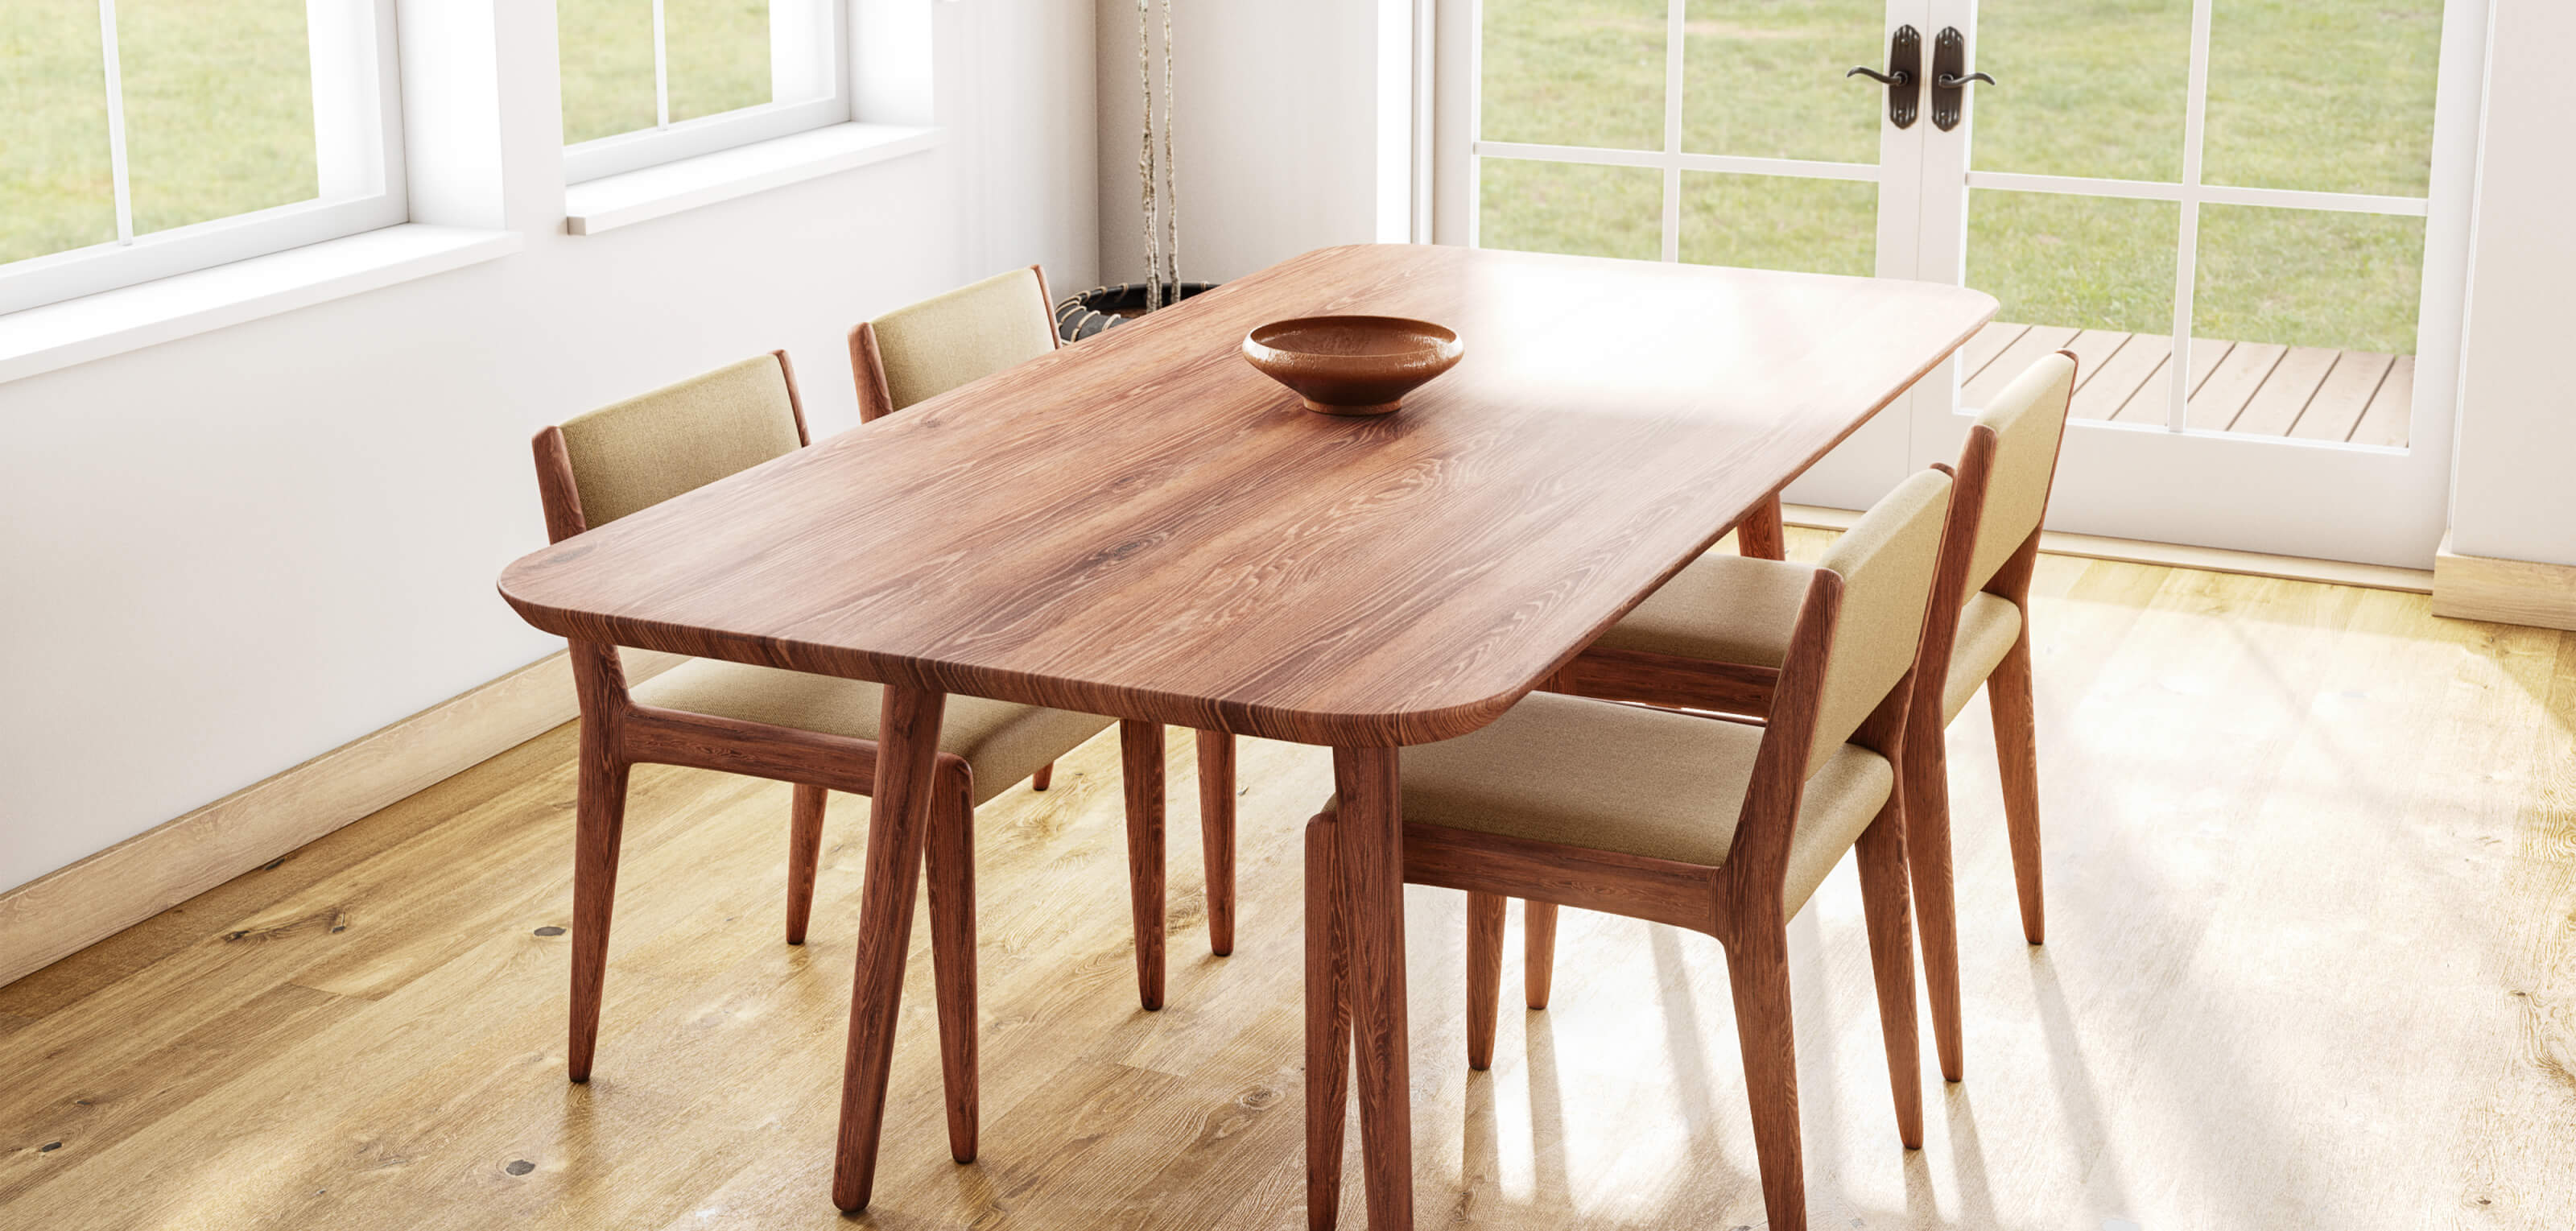 Voya dining table and chairs in walnut